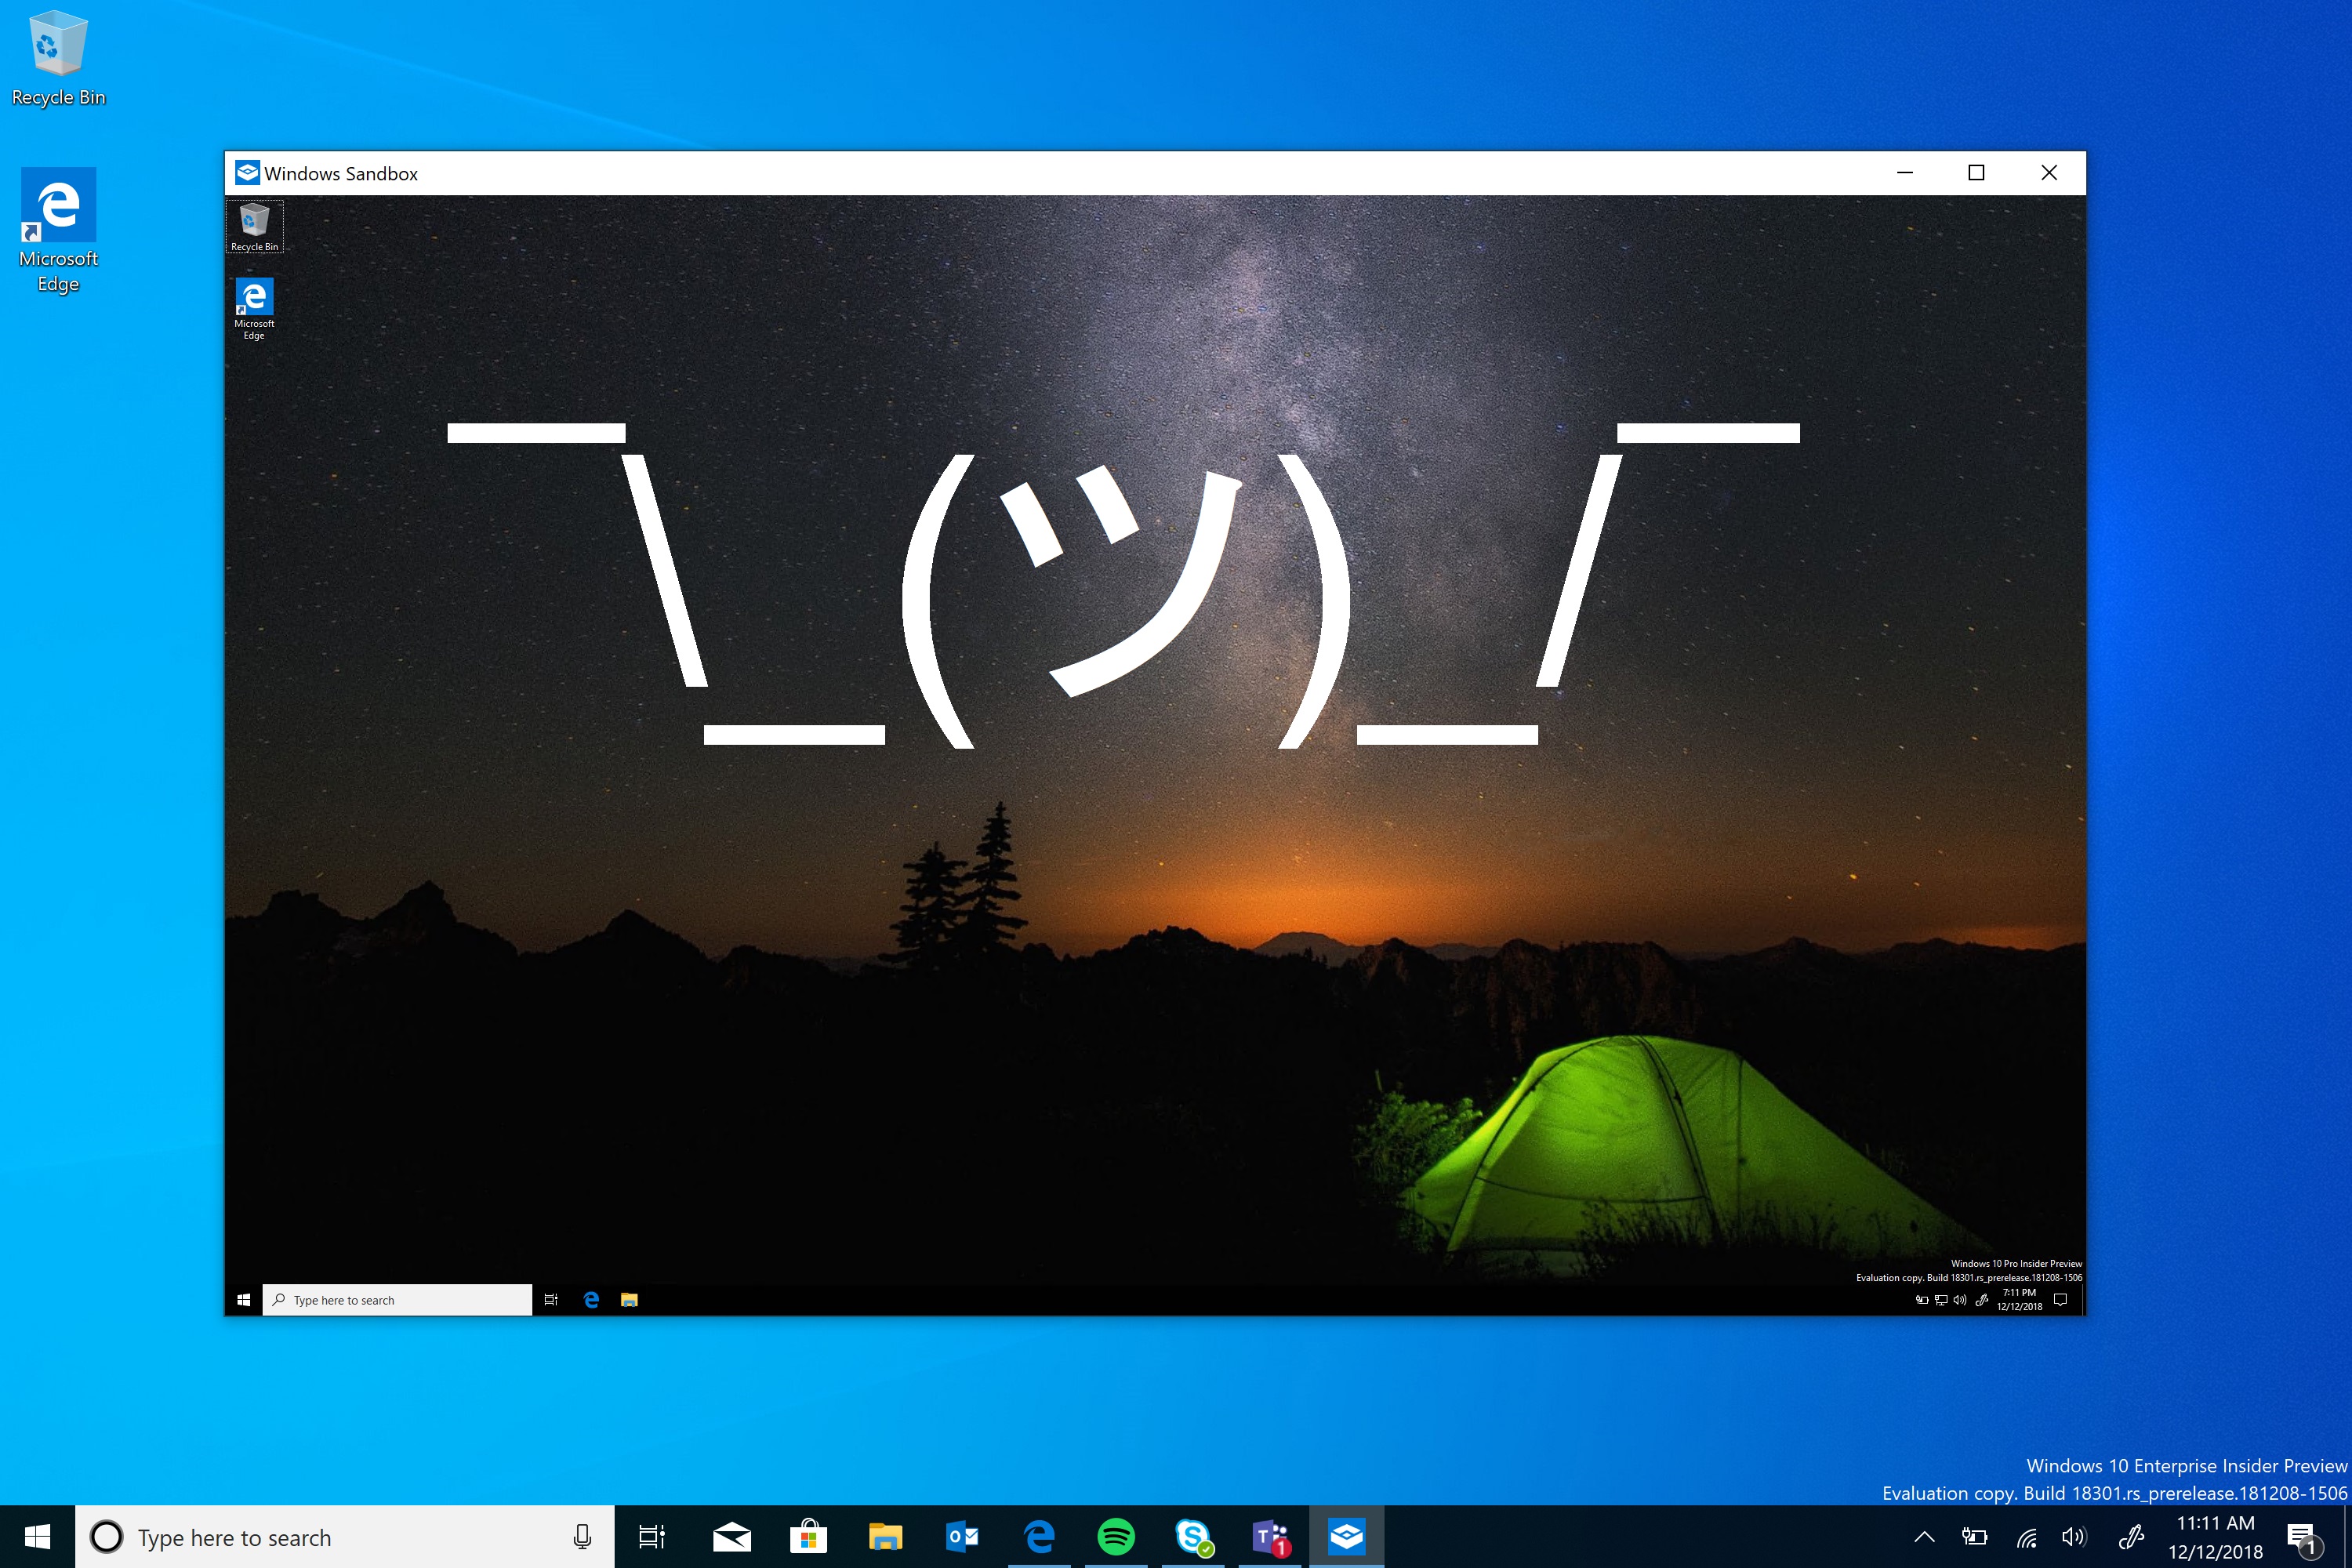 how does the os for a mac look compared to windows 10 on a pc?